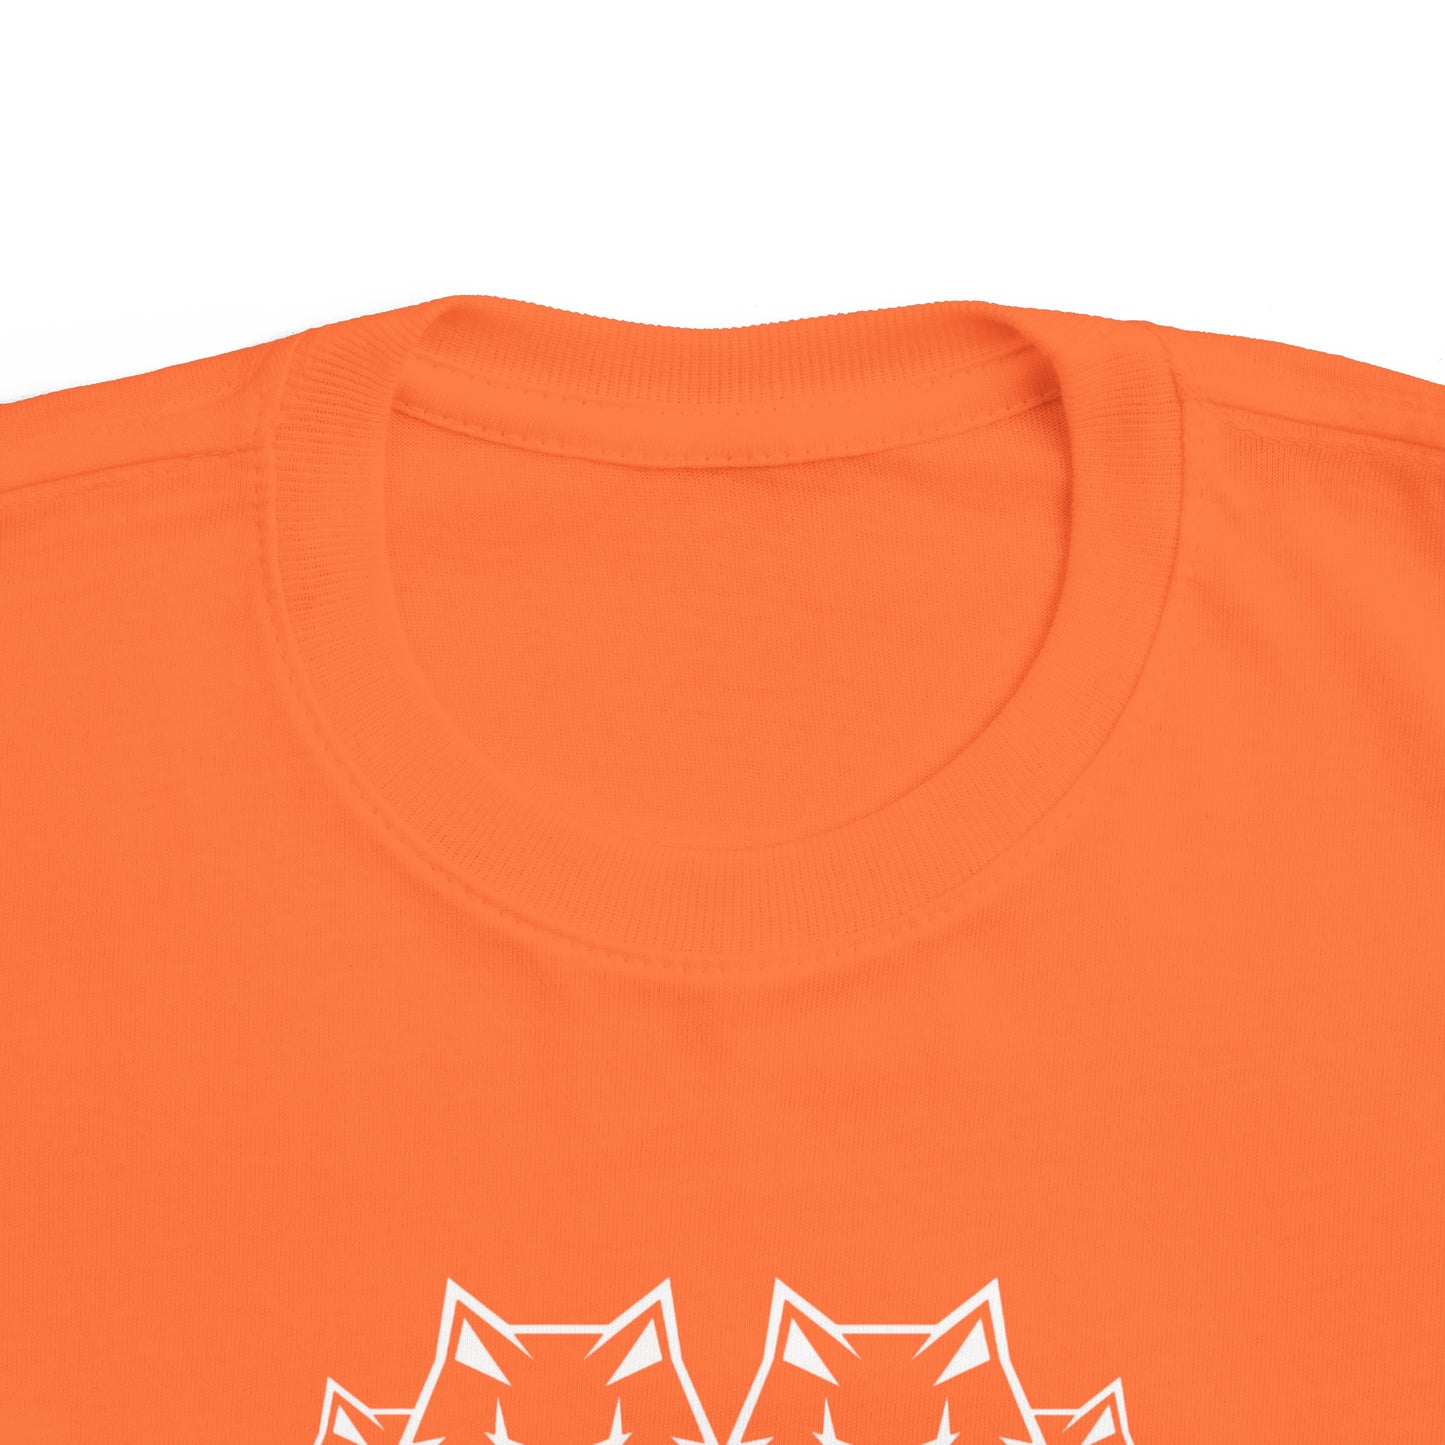 Toddler's Wolfpack Tee